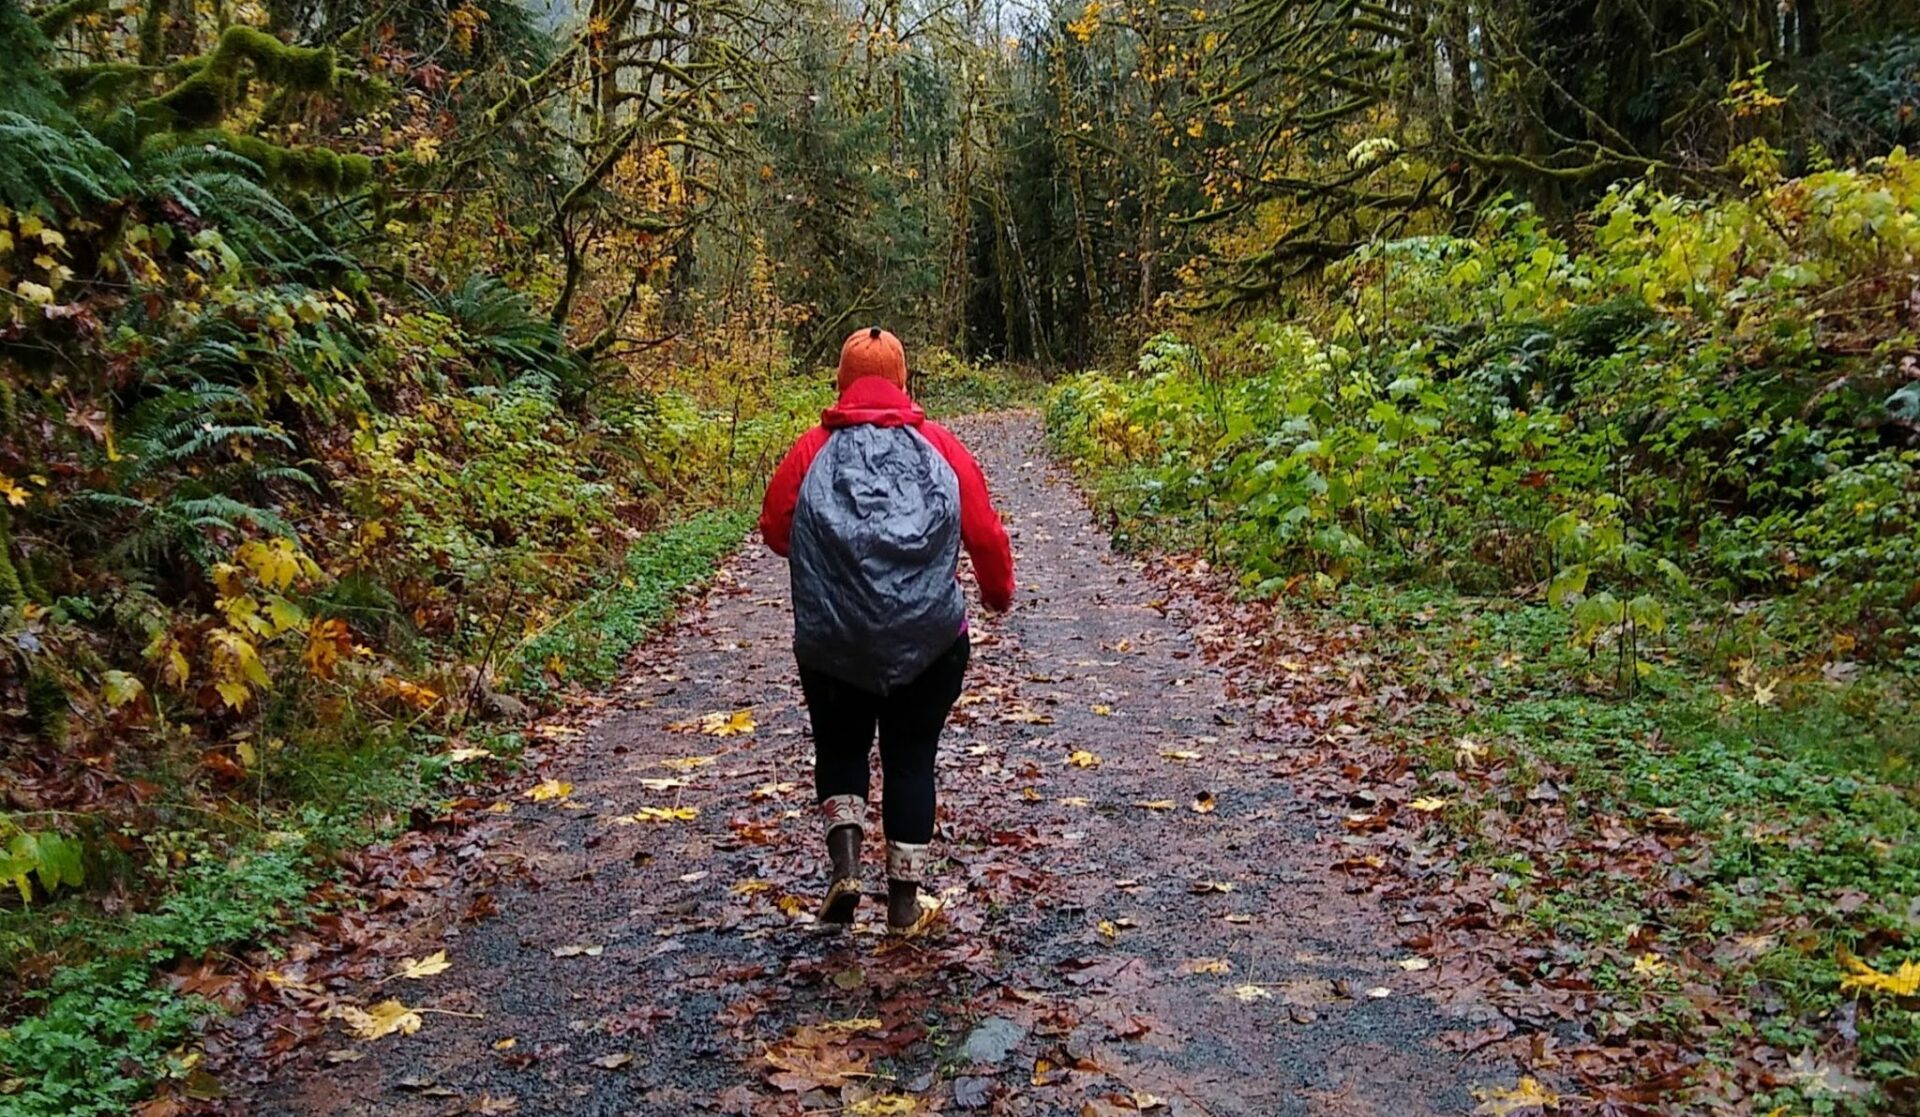 A person on a wet hiking trail in the rain. The person is wearing rubber boots, black leggings, a red rainjacket and an orange hat as well as a backpack with a rain cover. They are walking on a gravel trail with undergrowth and trees on each side